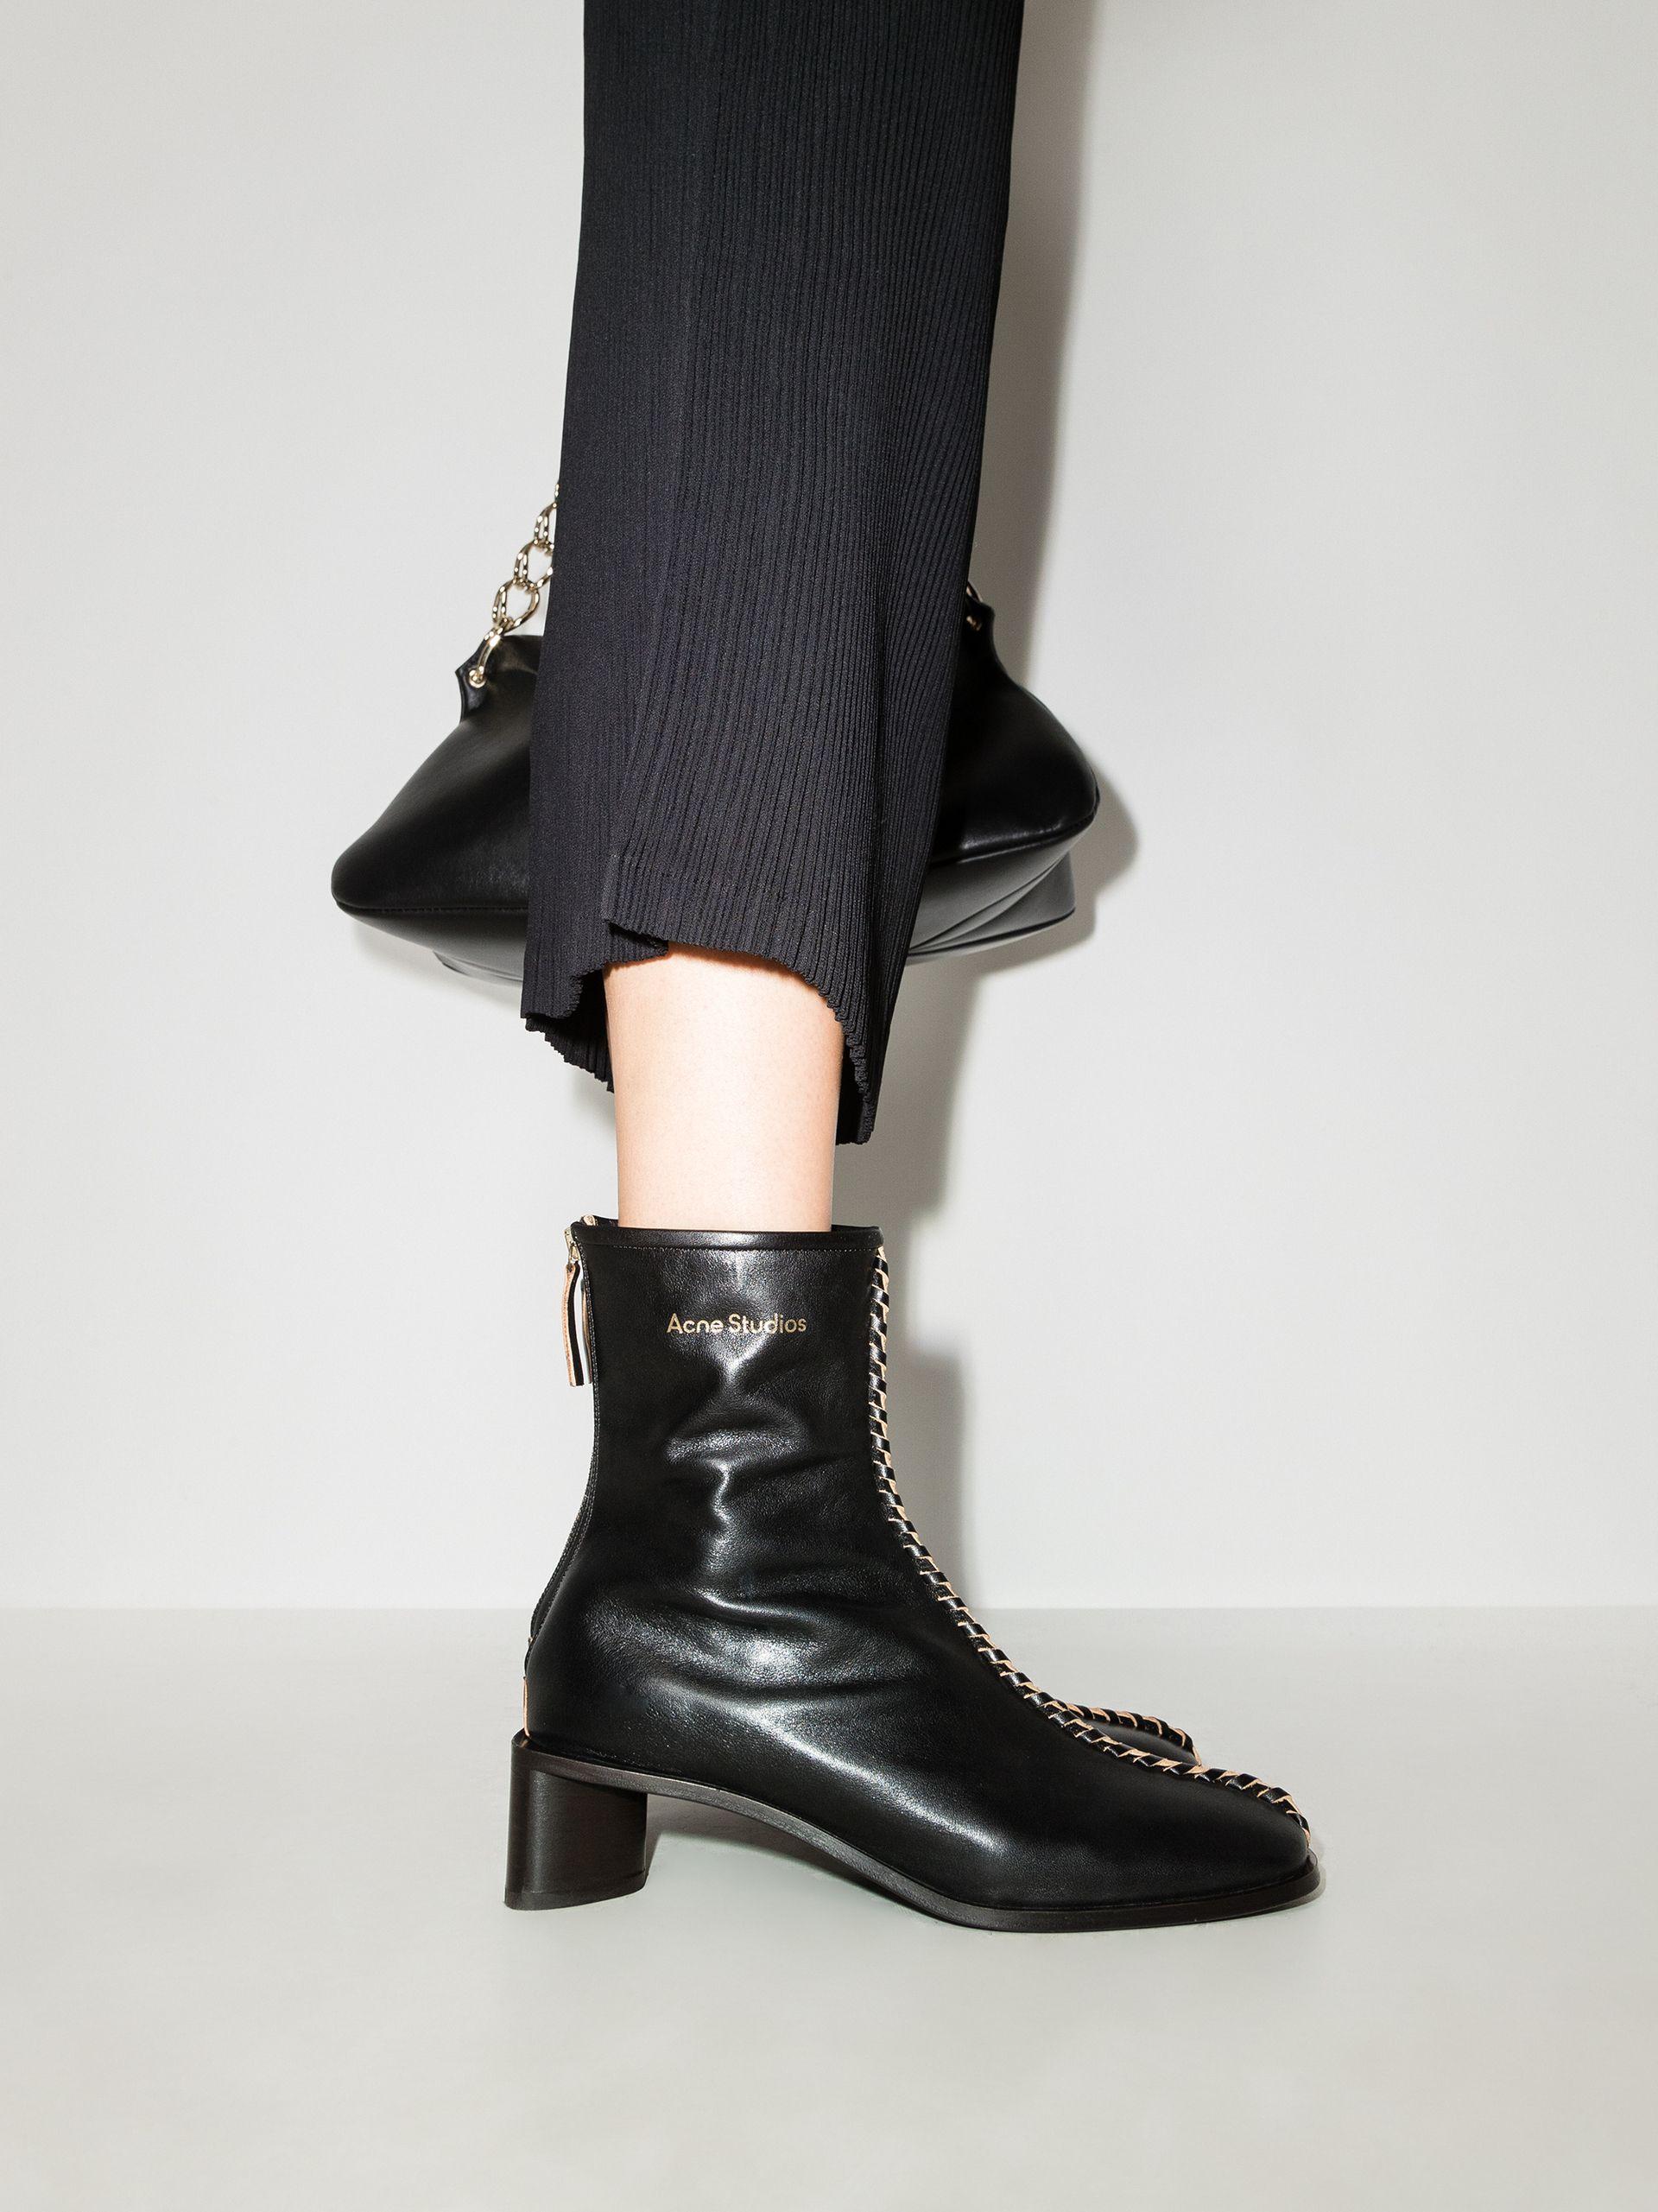 Acne Studios Bertine 50 Whipstitch Leather Boots in Black | Lyst